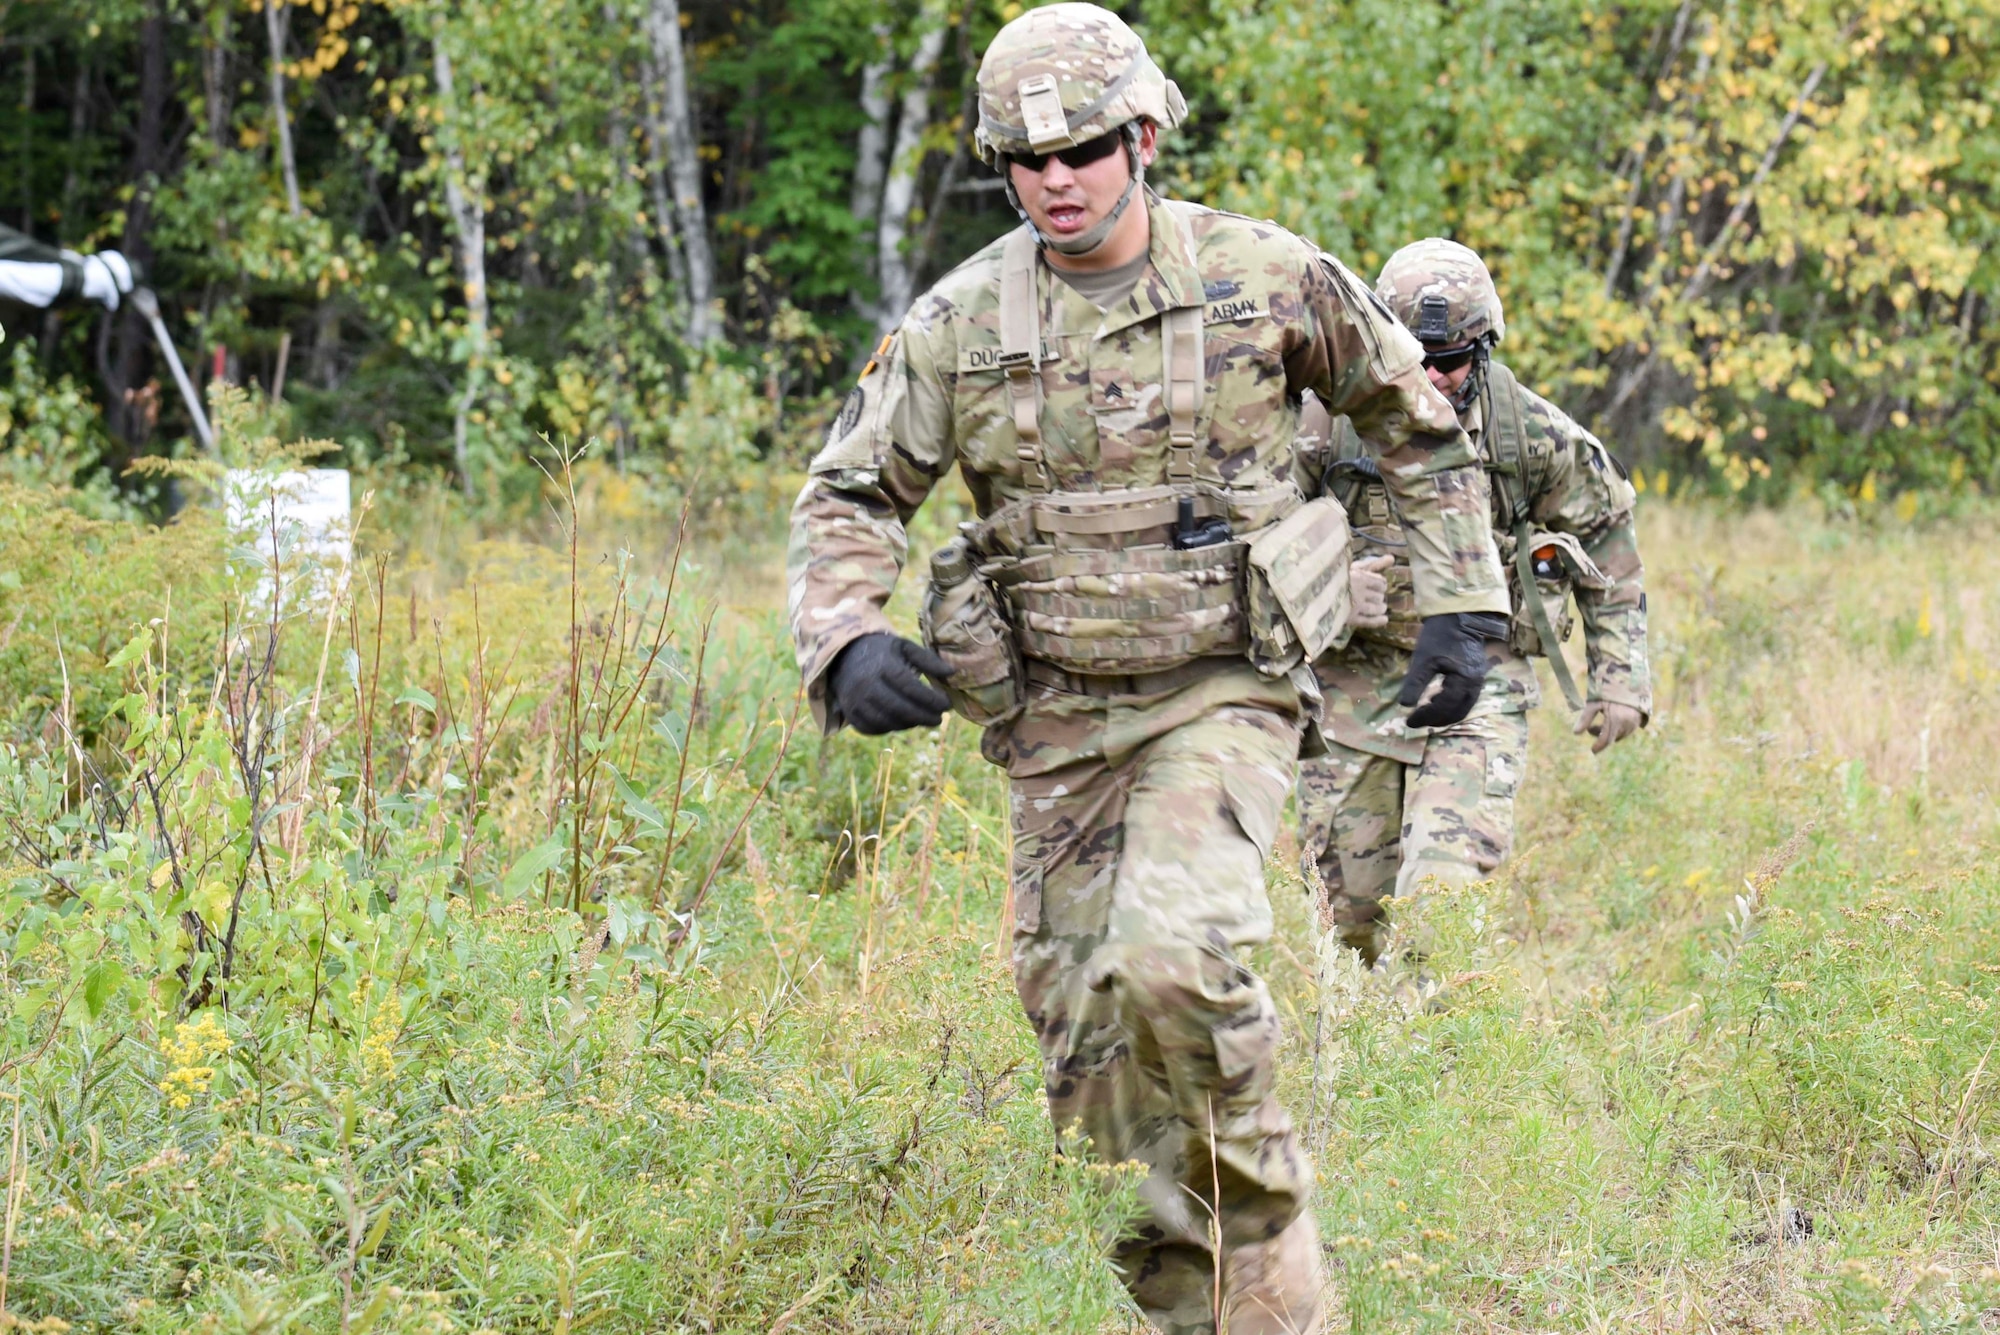 Sergeant Rayn Duginski and Staff Sergeant Wealey Goff of the 278th Armored Cavalry Regiment in Knoxville, Tenn., run towards the finishline during the land navigation and observation section of the Worthington Challenge.The Worthington Challenge is an internatoinal armored crew competition, hosted by the Canadian Army, focused on showing armed crew skills as well as sharing best training practices amongst allies.(US Air Force photo by Senior Airman Leon Bussey / Released)